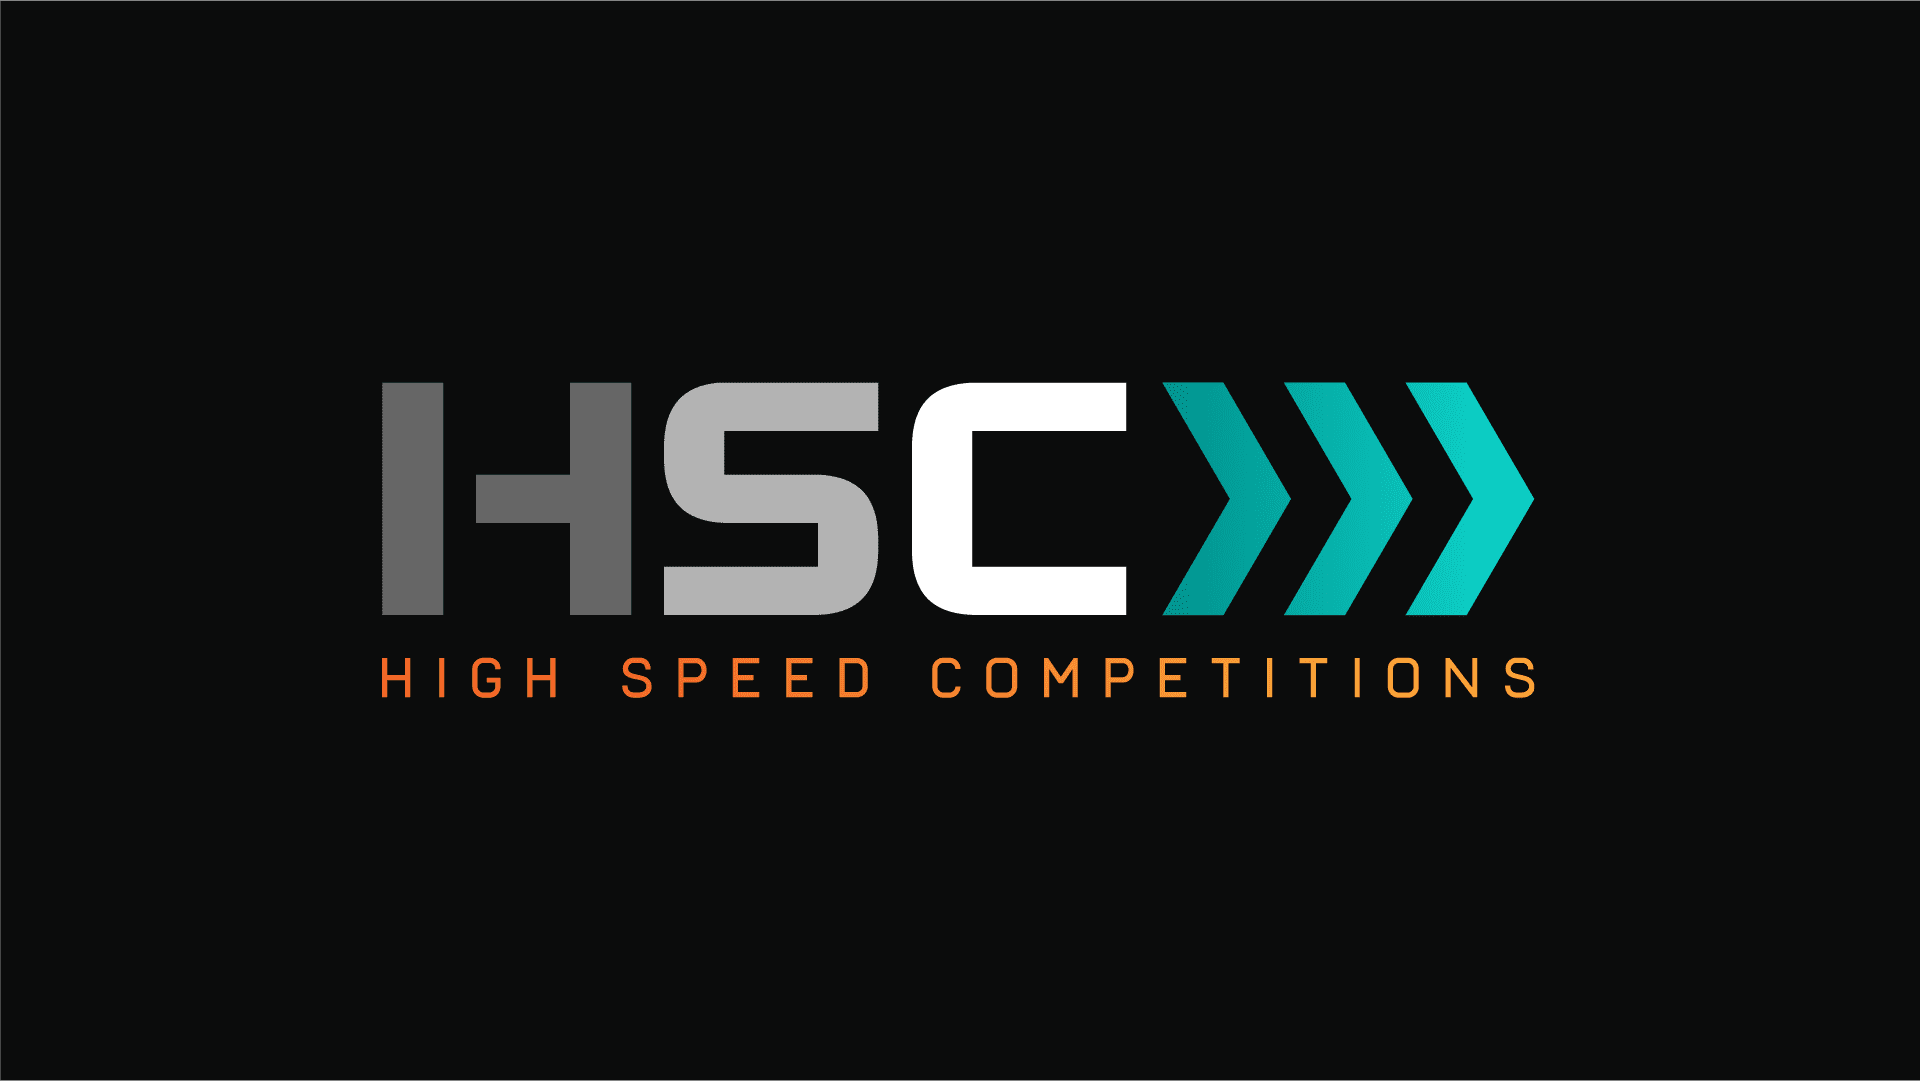 High competition